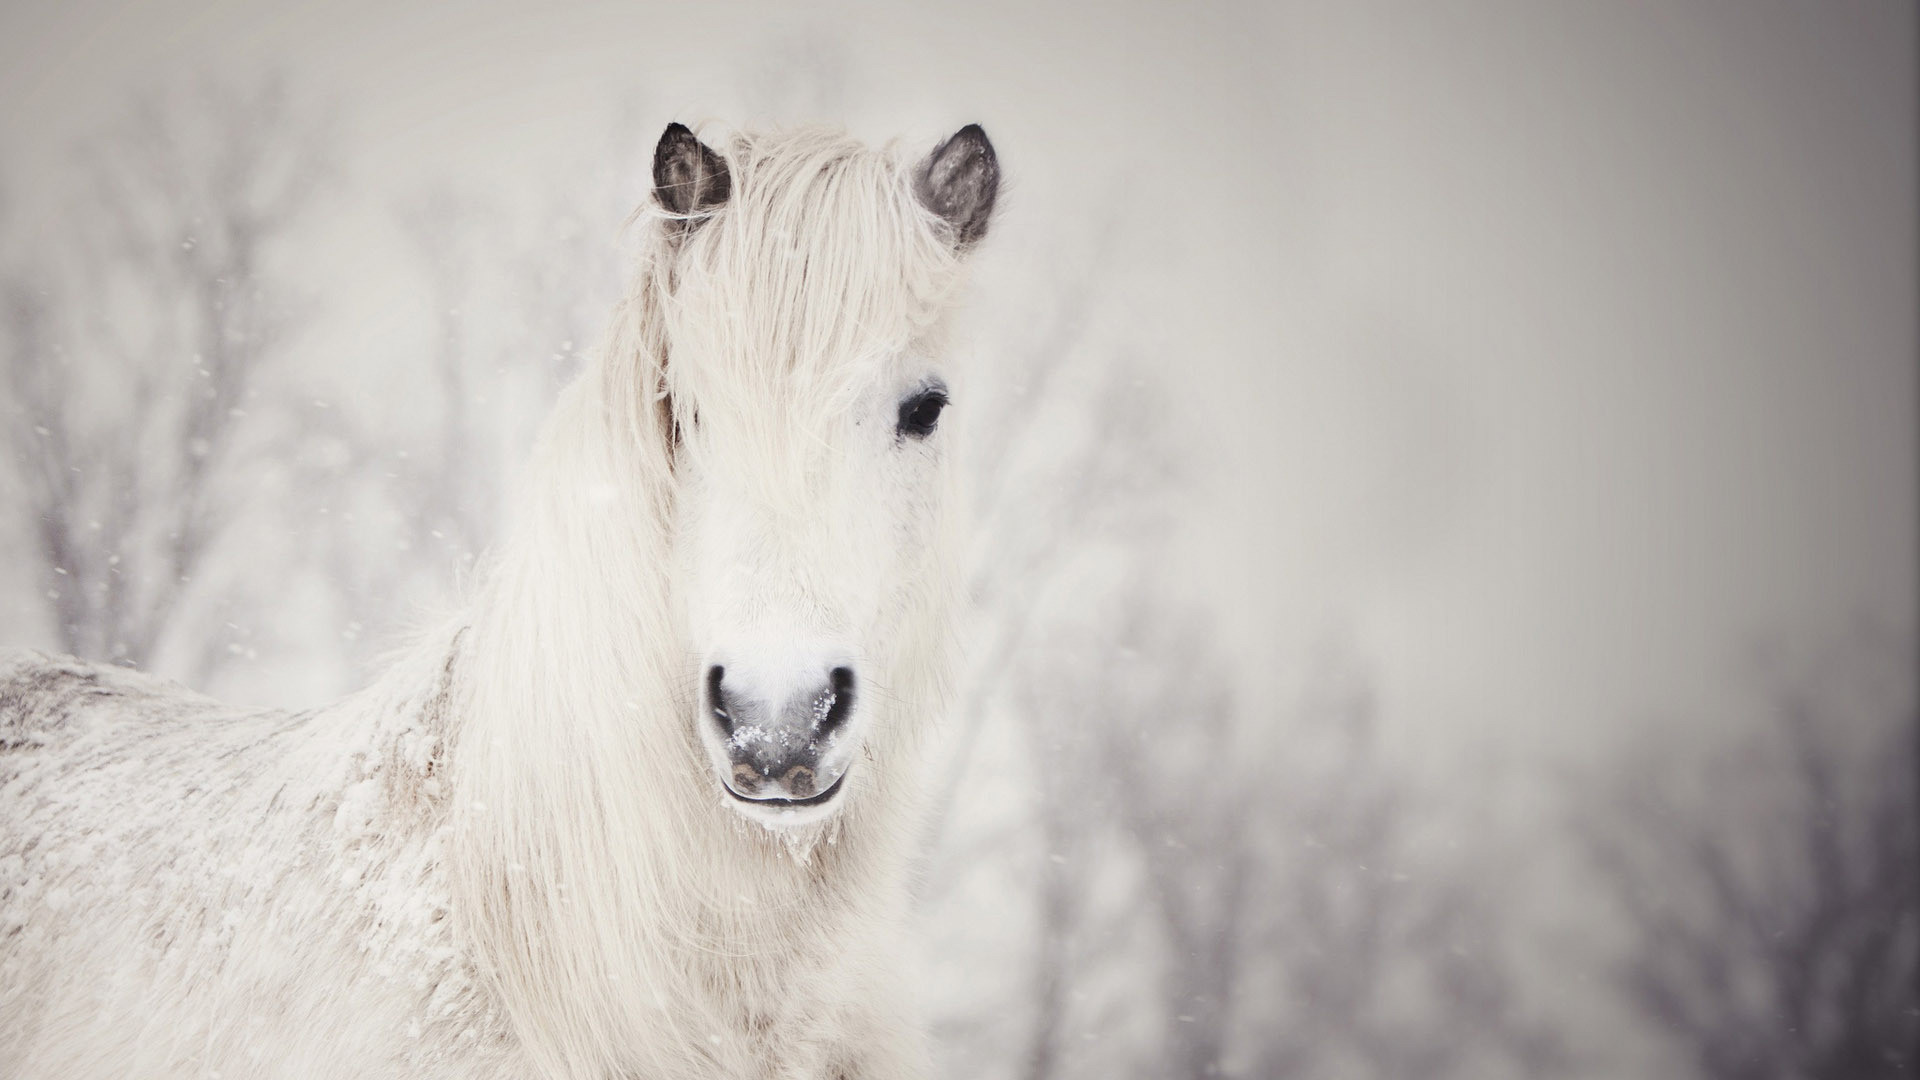 1920x1080 White horse in the snow HD Wallpaper 